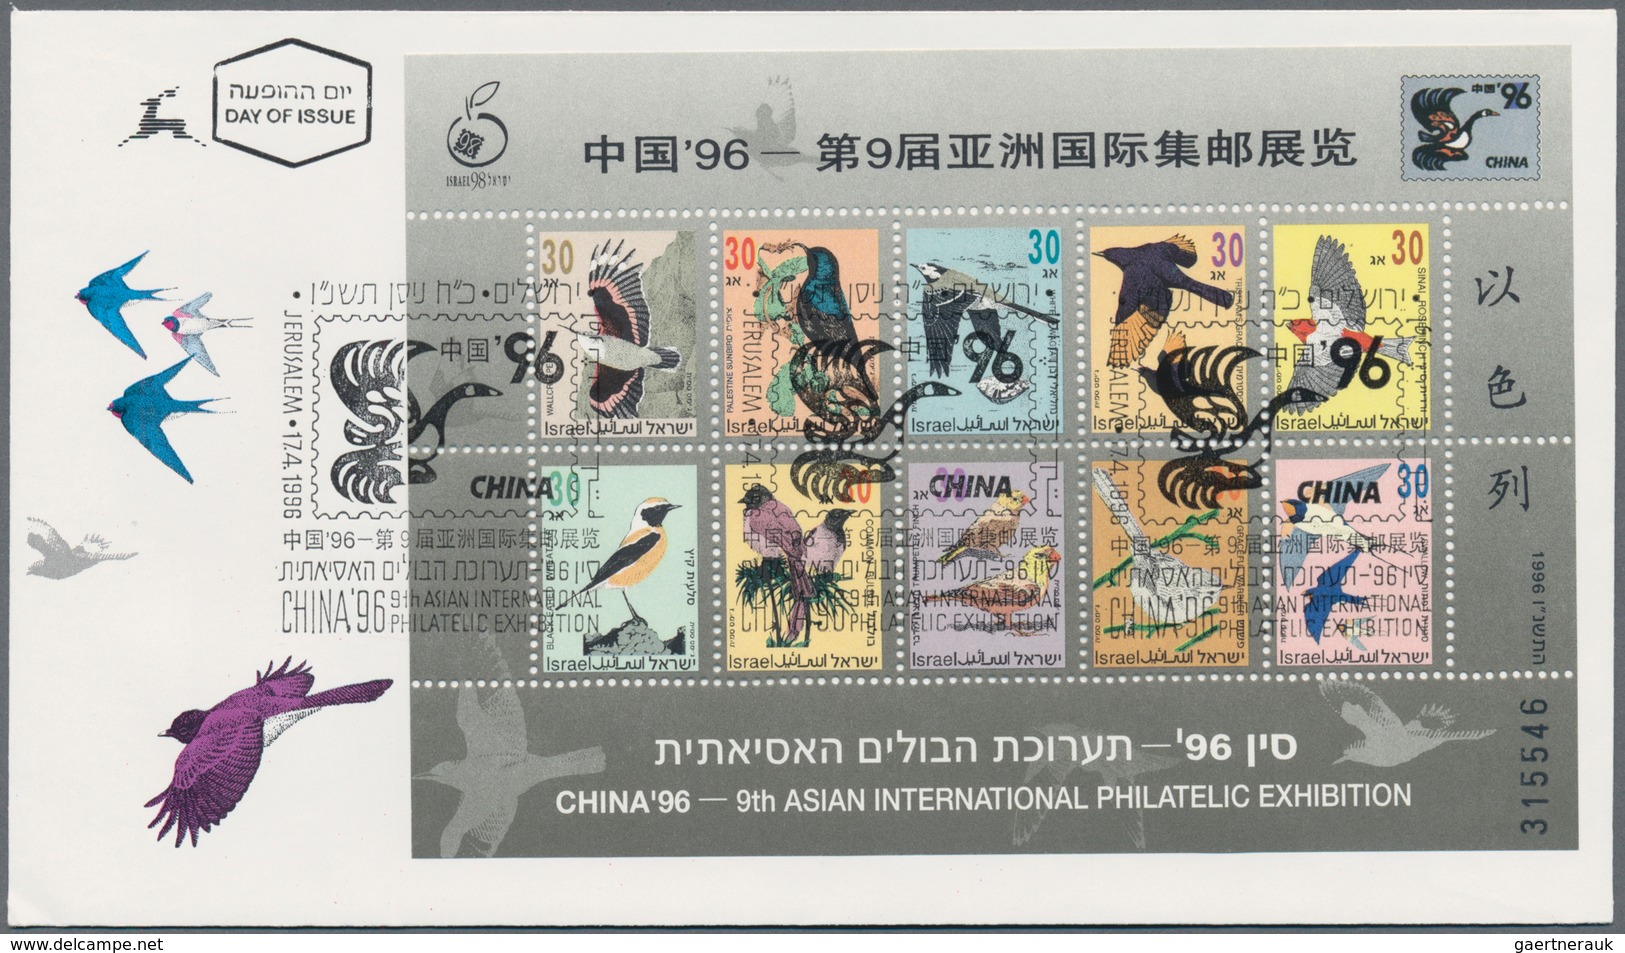 Israel: 1933/2002 (ca.), comprehensive stock of more than 1500 first day cover partly sorted in big